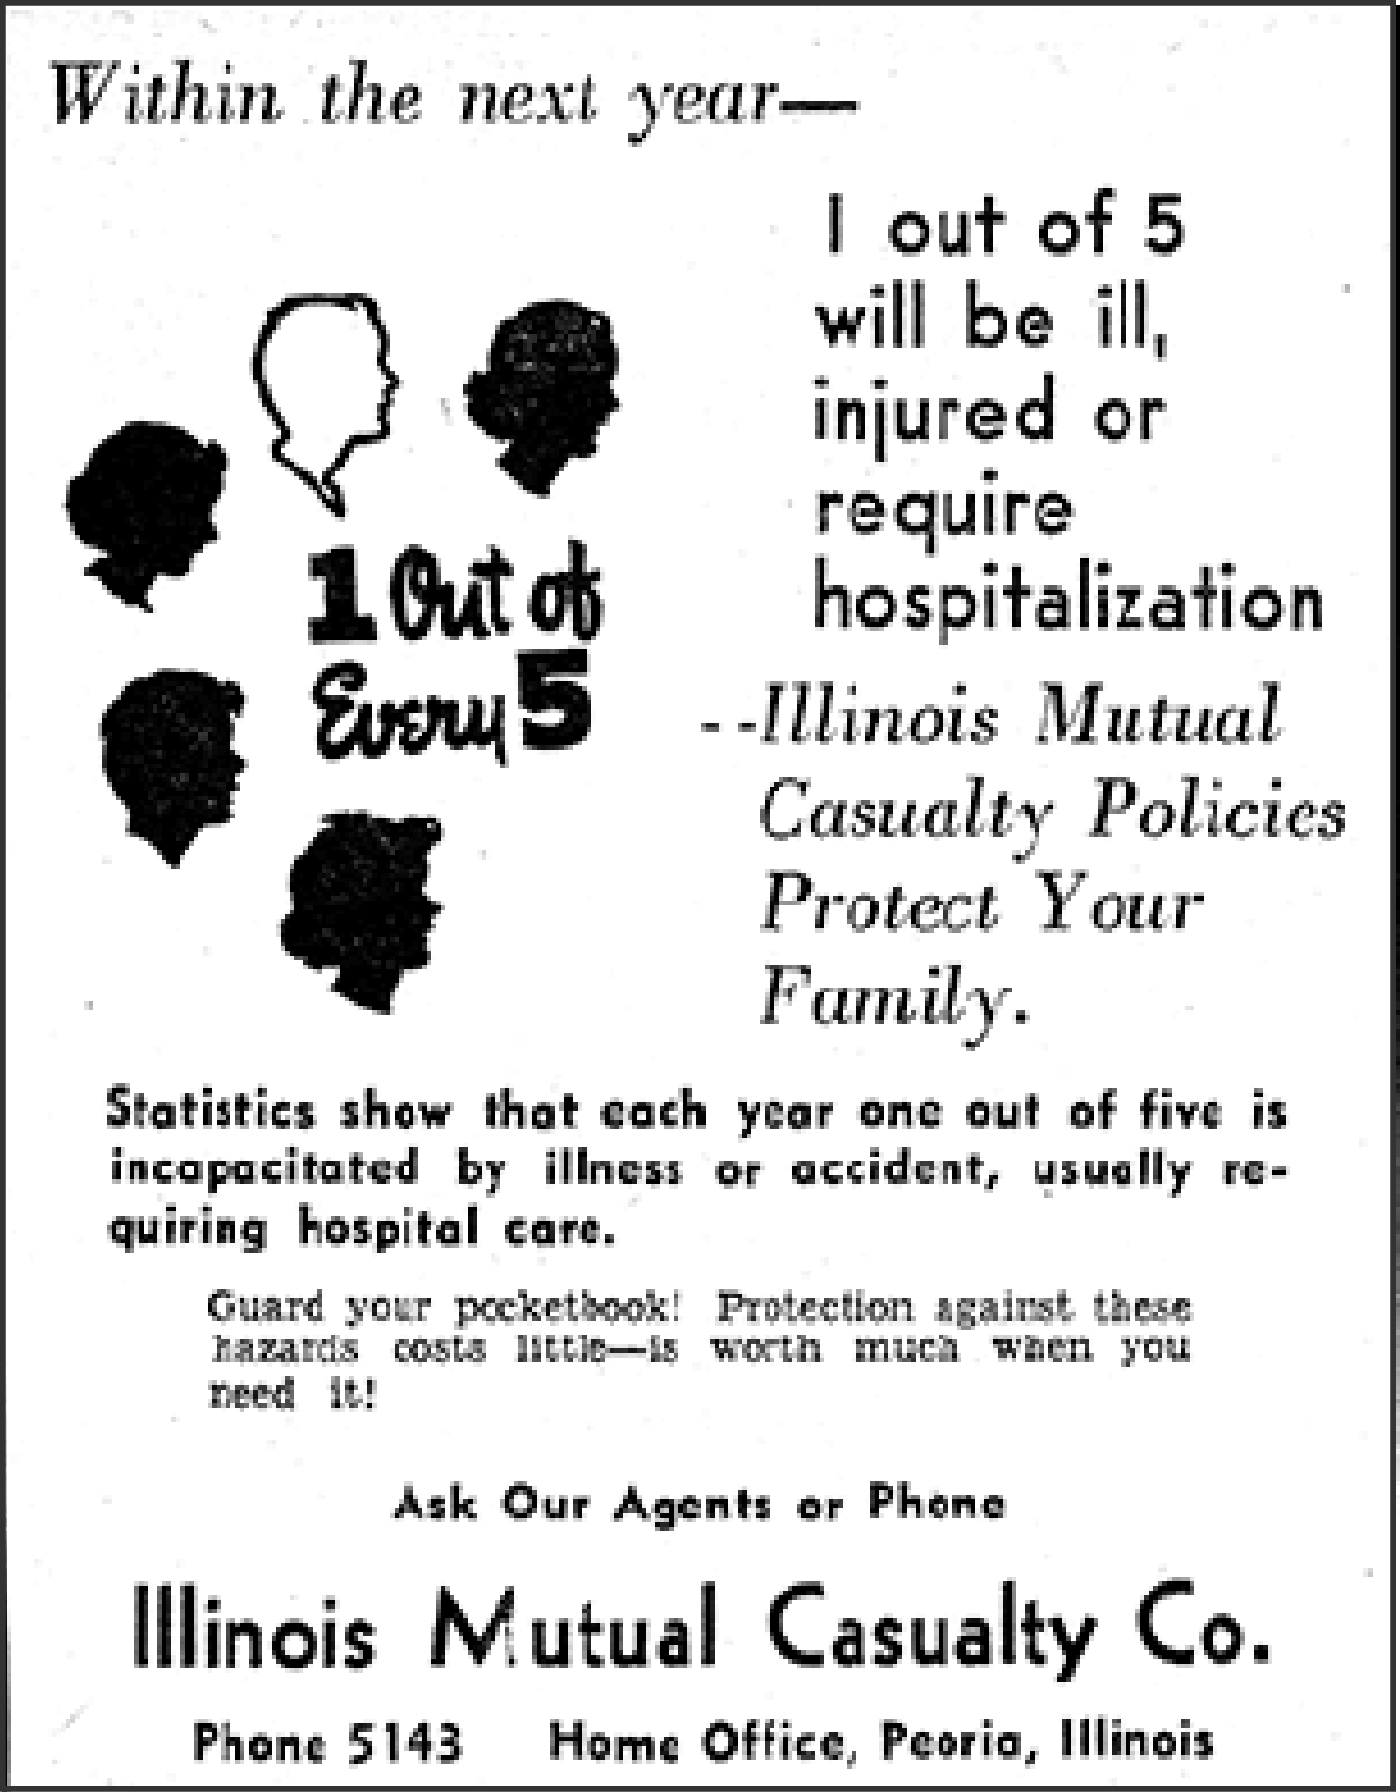 Advertisement for Disability Income Insurance offered by Illinois Mutual Casualty Company.